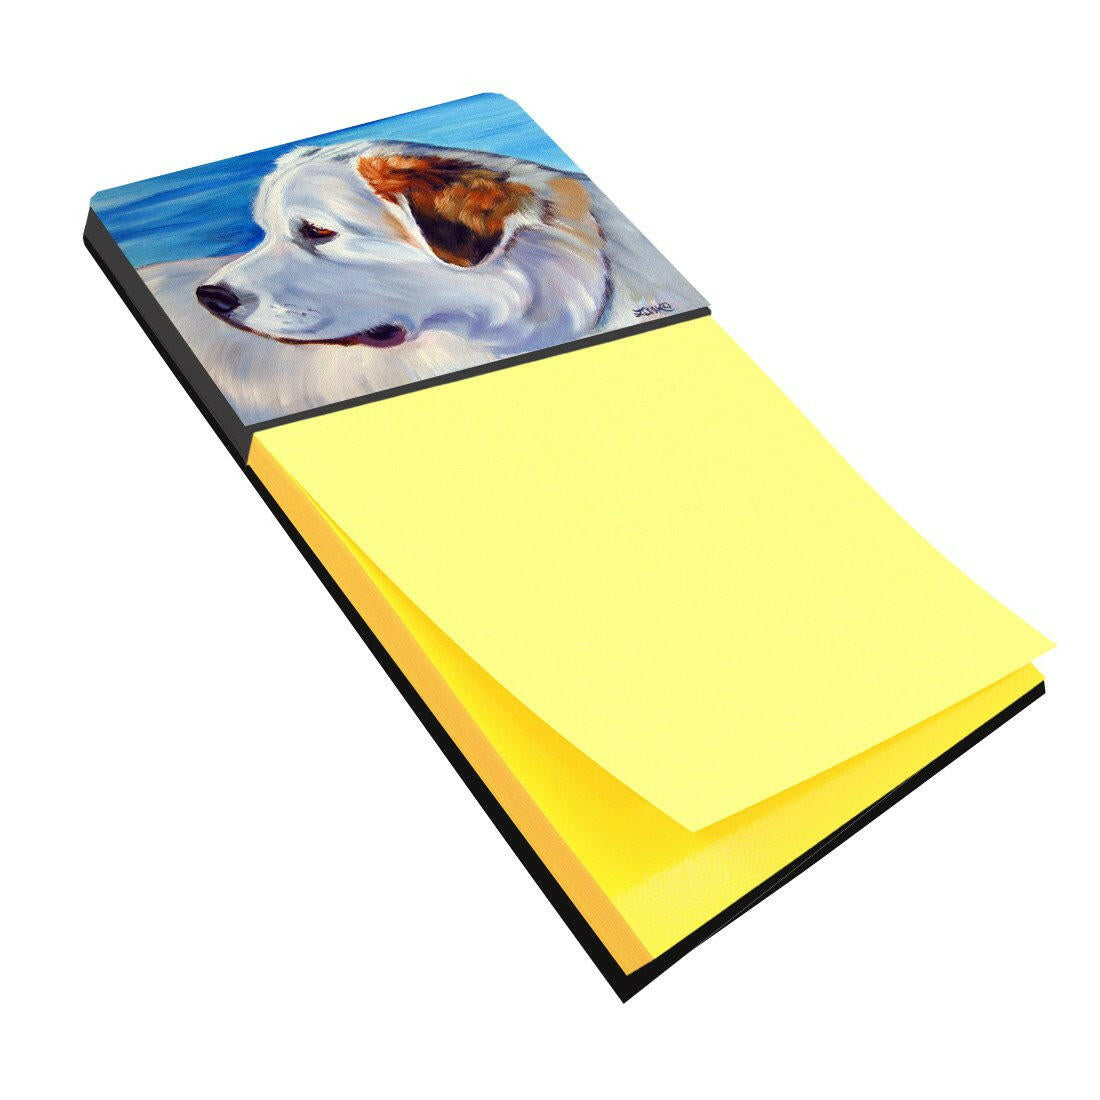 Great Pyrenees at the Beach Sticky Note Holder 7417SN by Caroline's Treasures